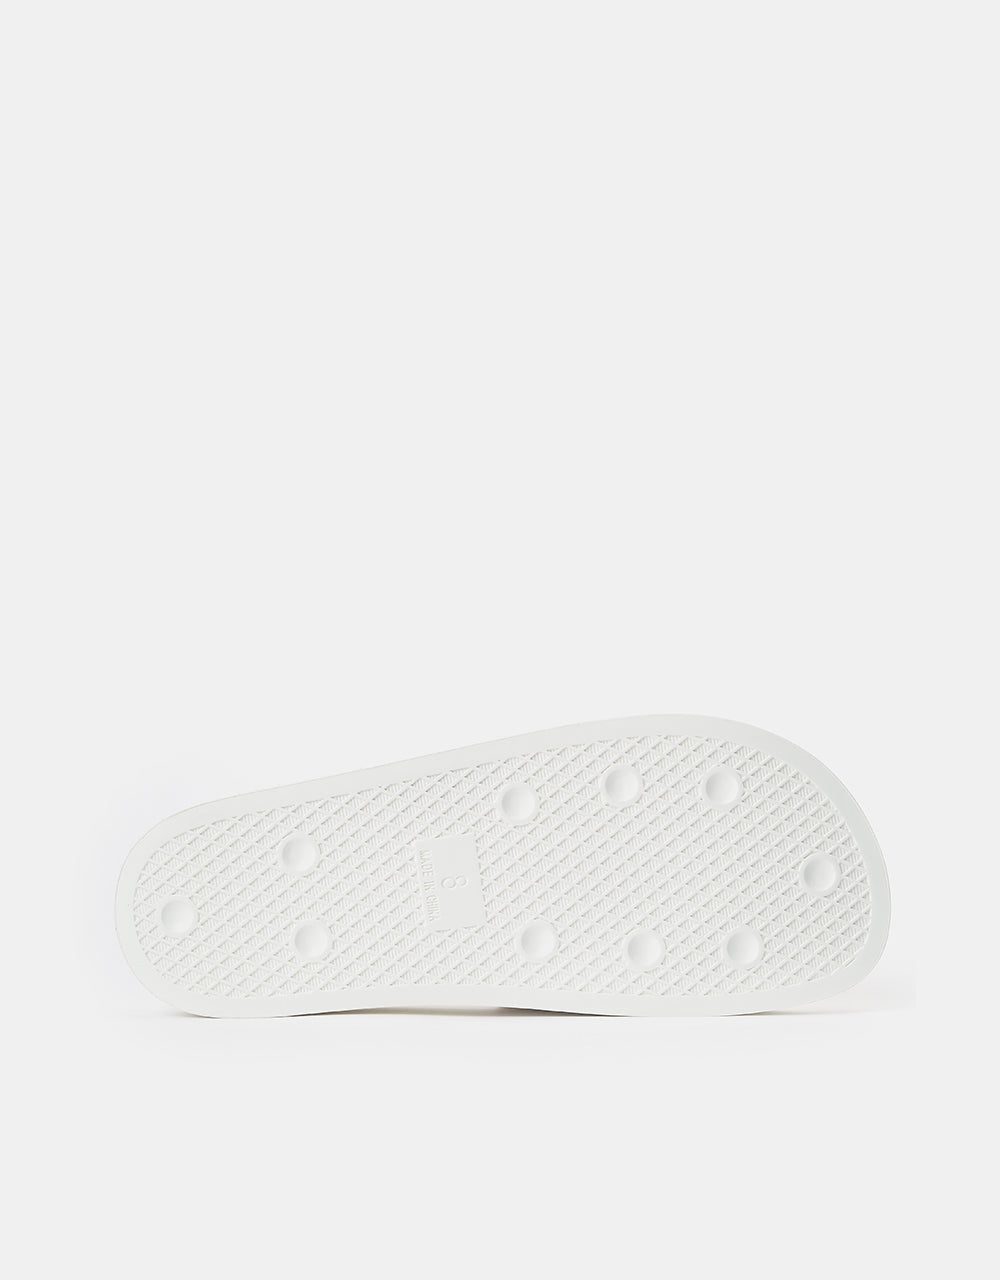 adidas Shmoofoil Slides - White/Bright Red/Pulse Mint